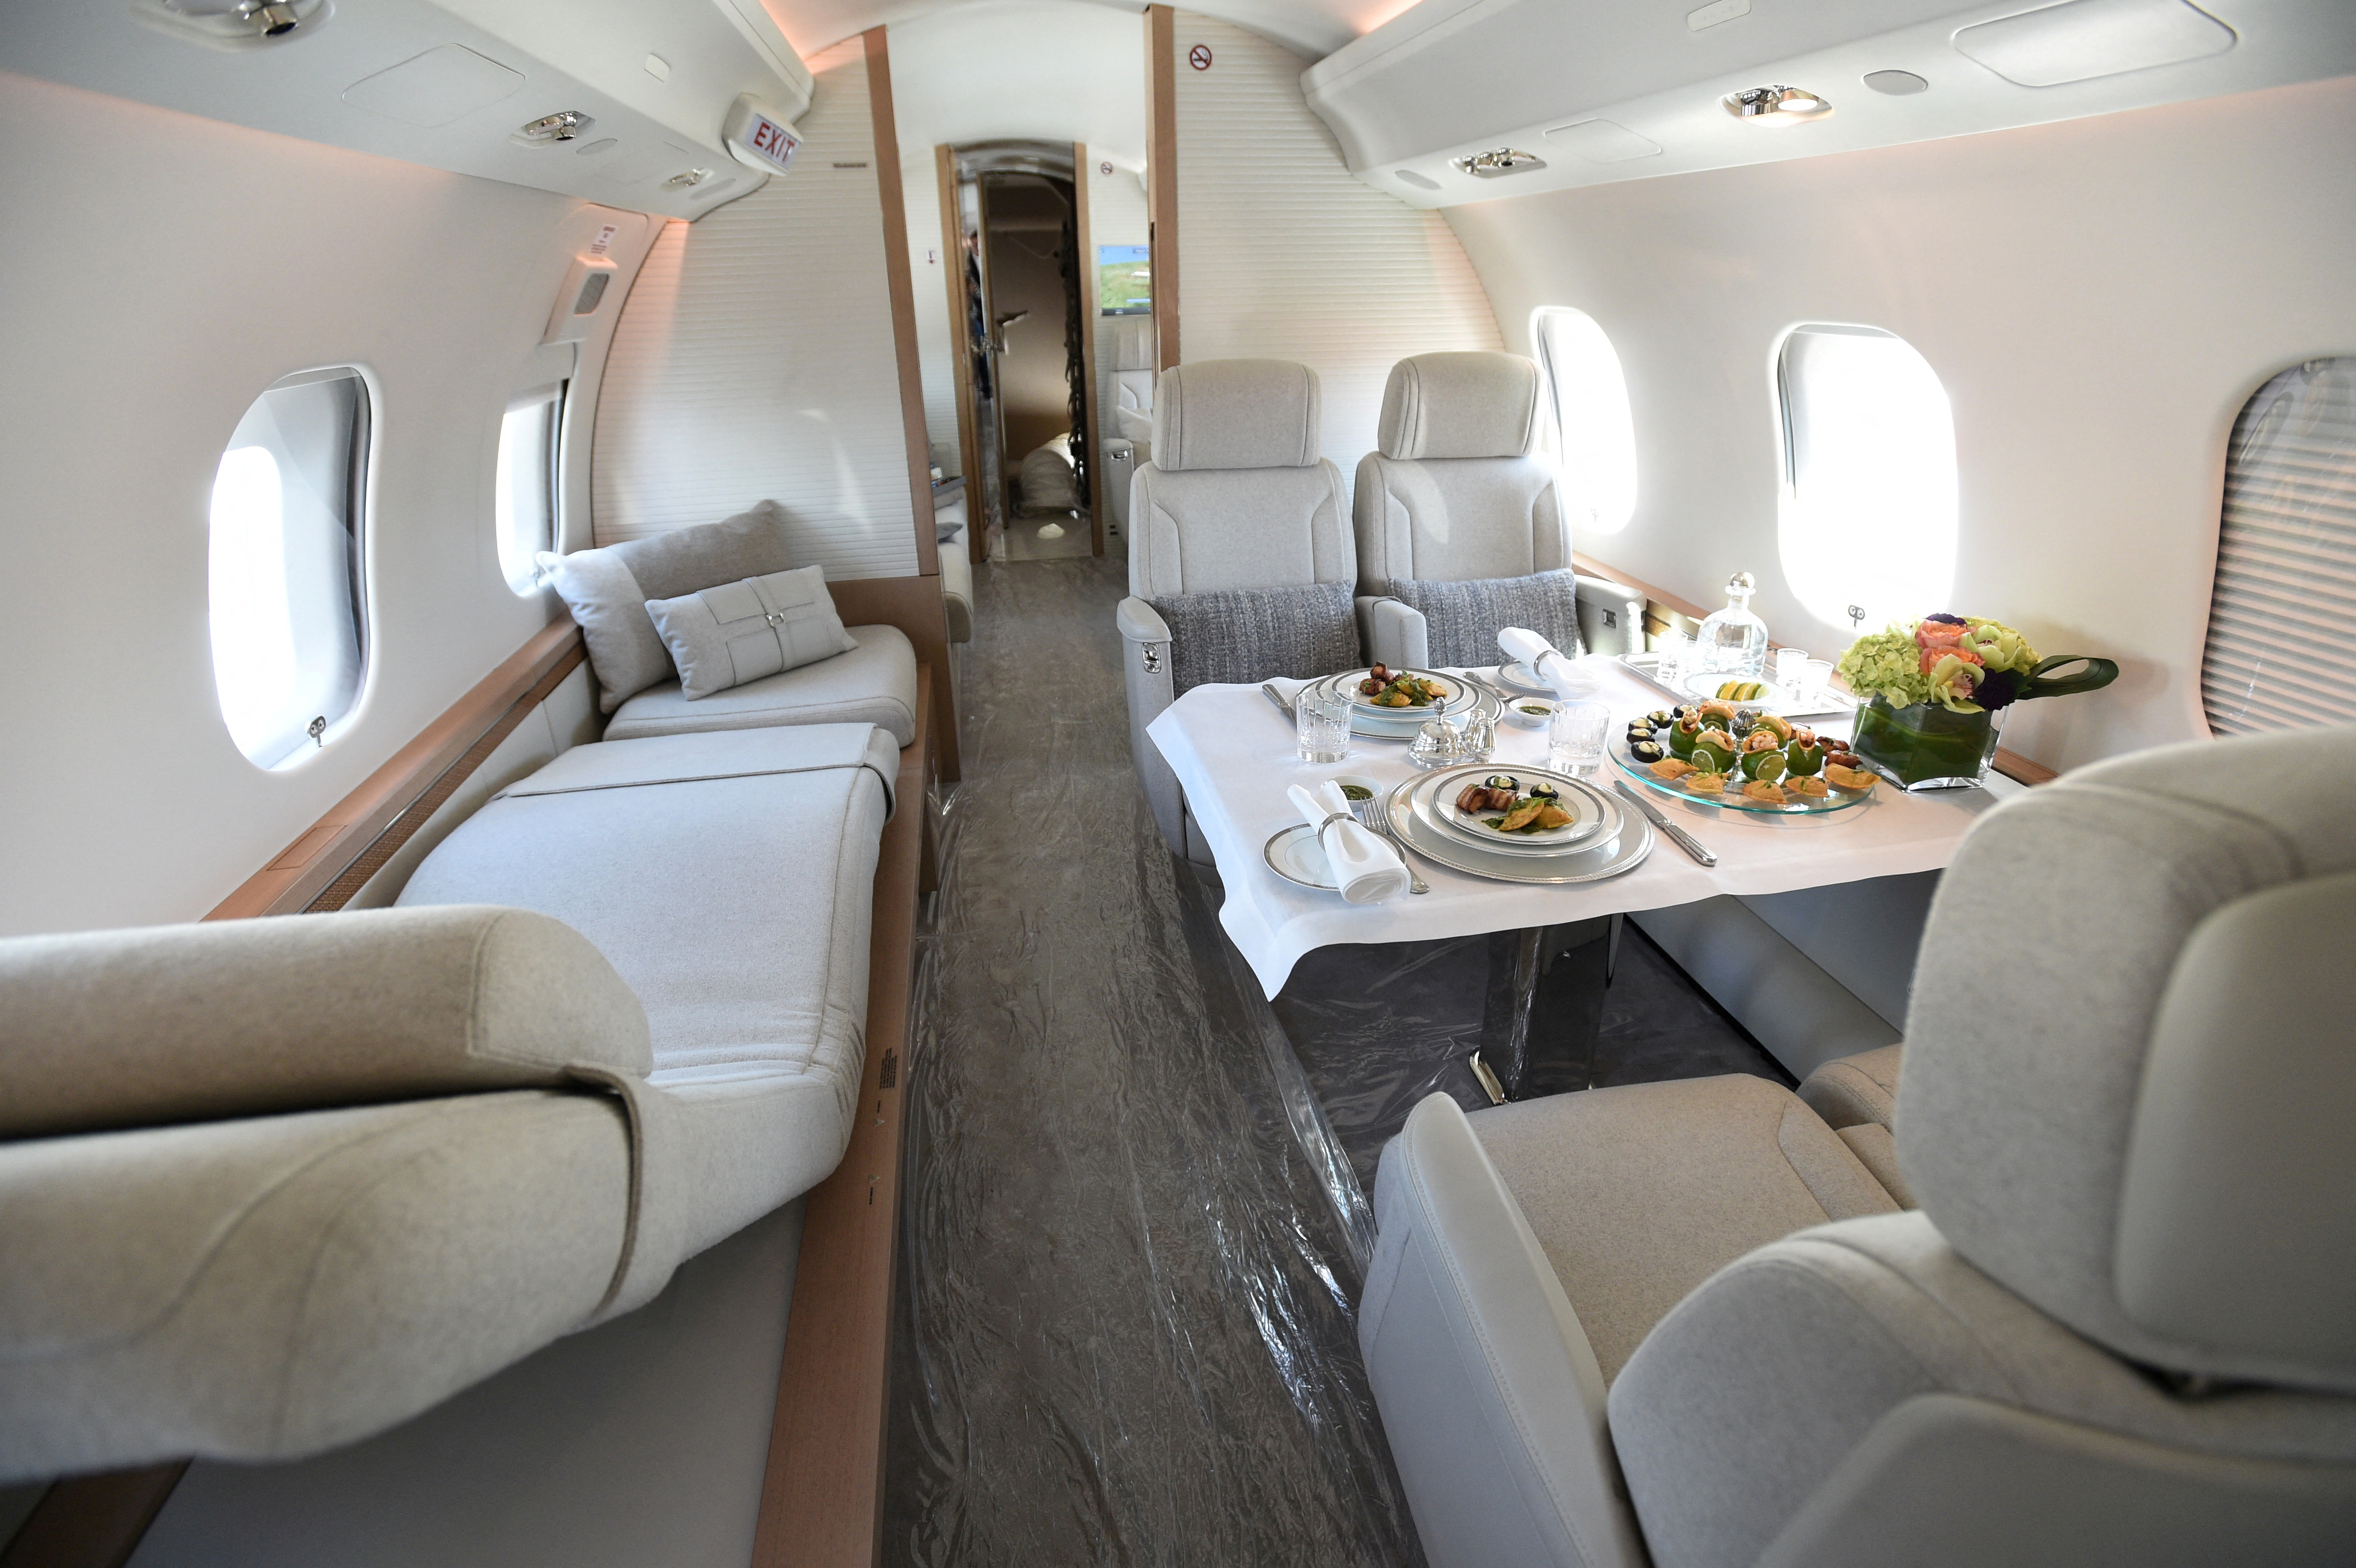 The interior of a business jet is seen at the National Business Aviation Association (NBAA) exhibition in Las Vegas